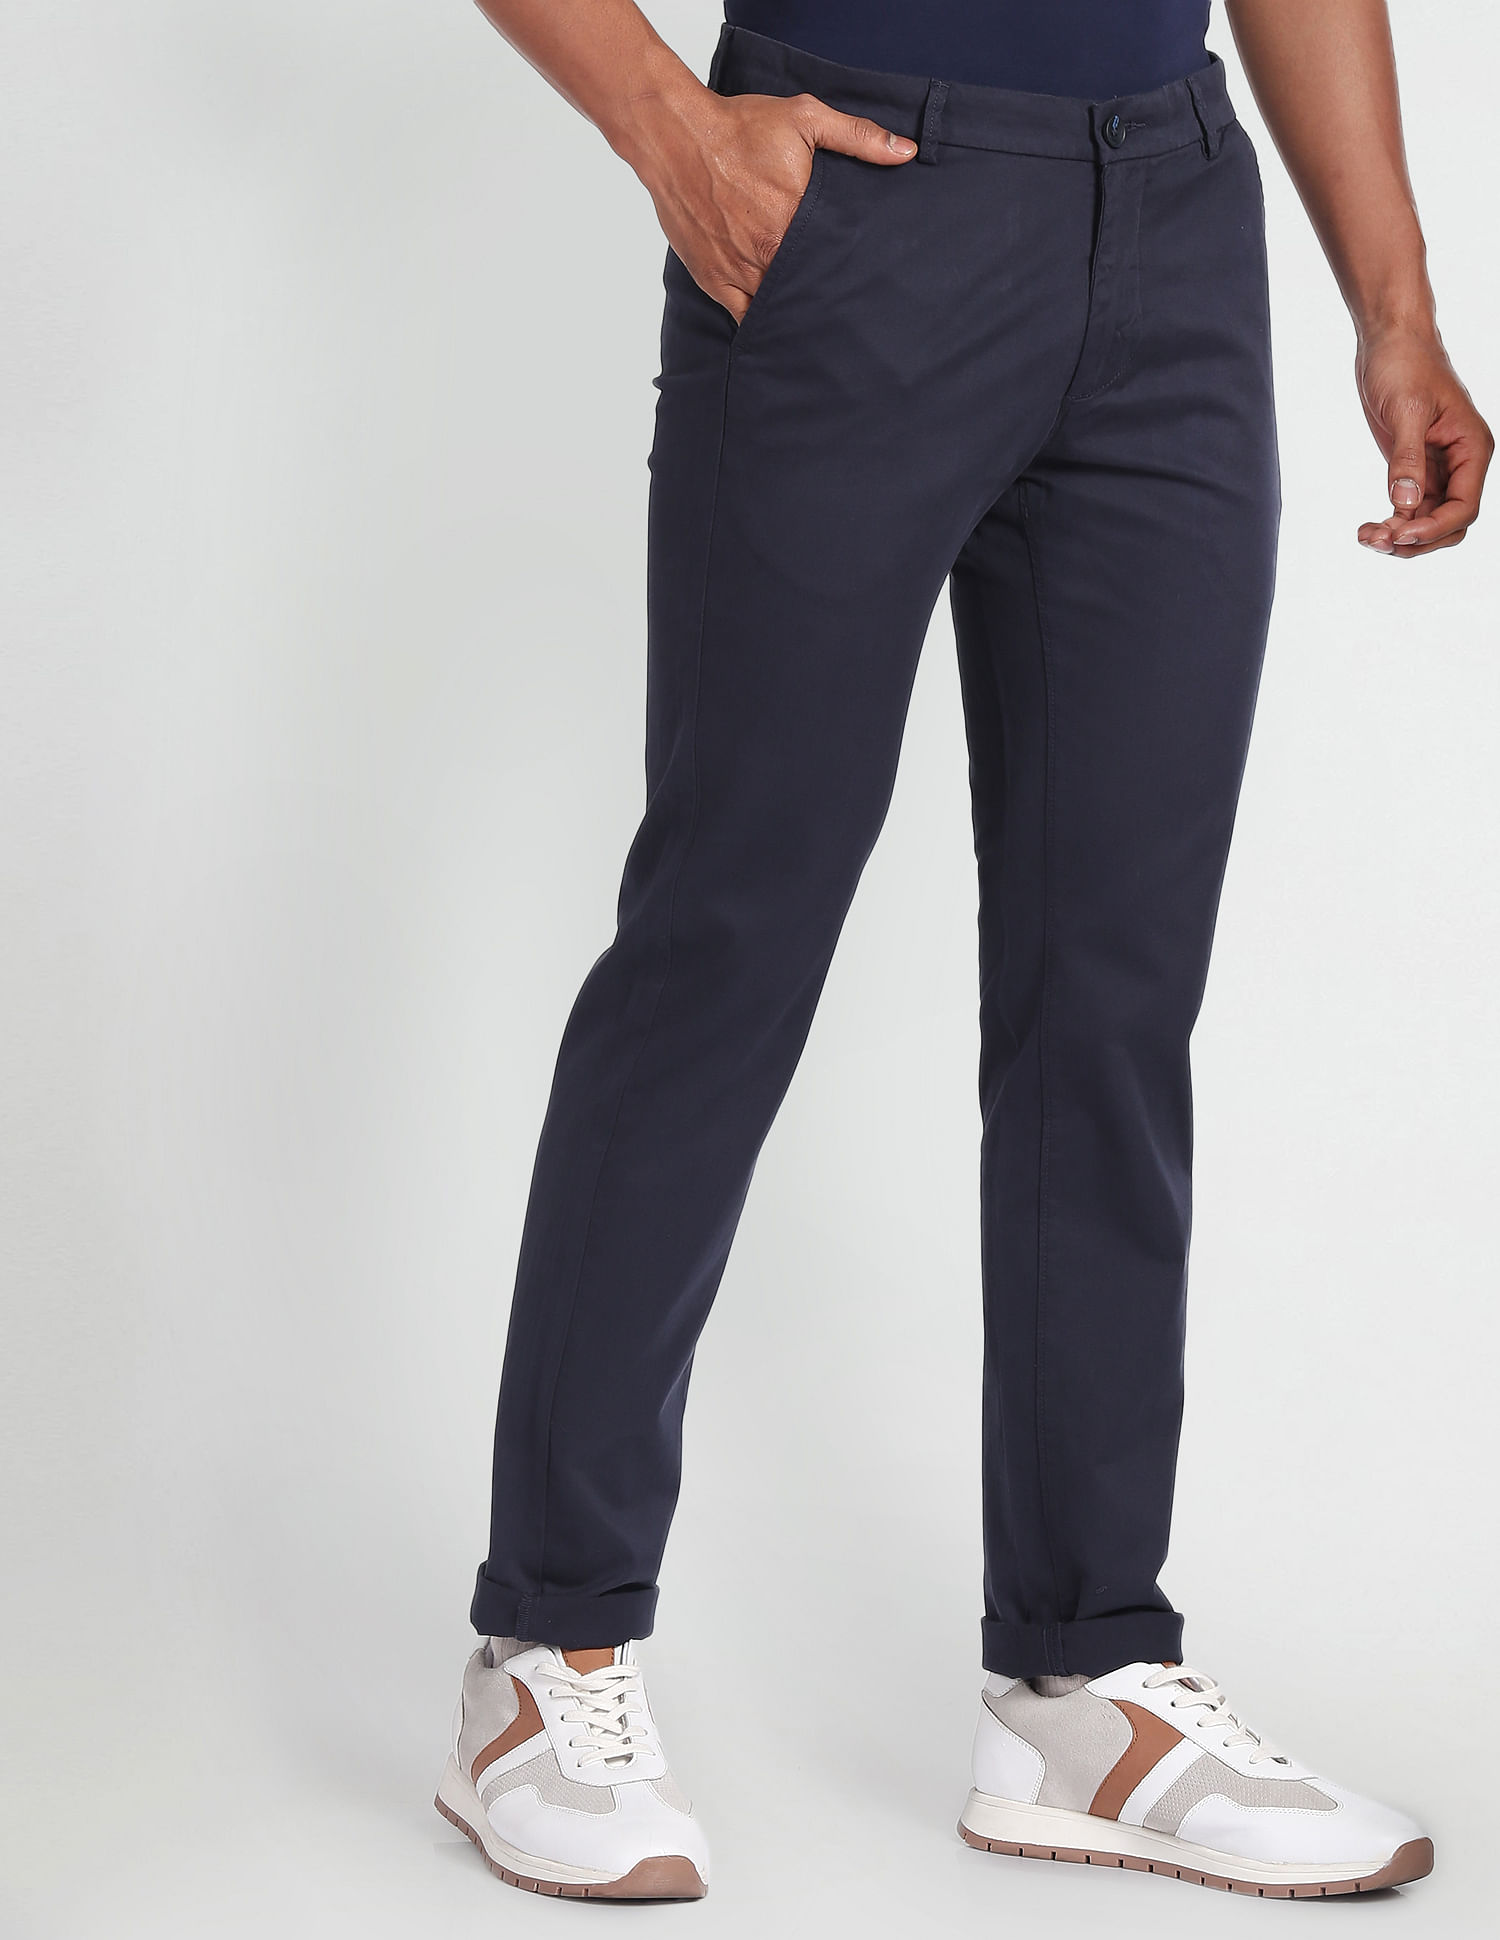 ZEGNA Slim-Fit Stretch-Cotton Twill Trousers for Men | MR PORTER